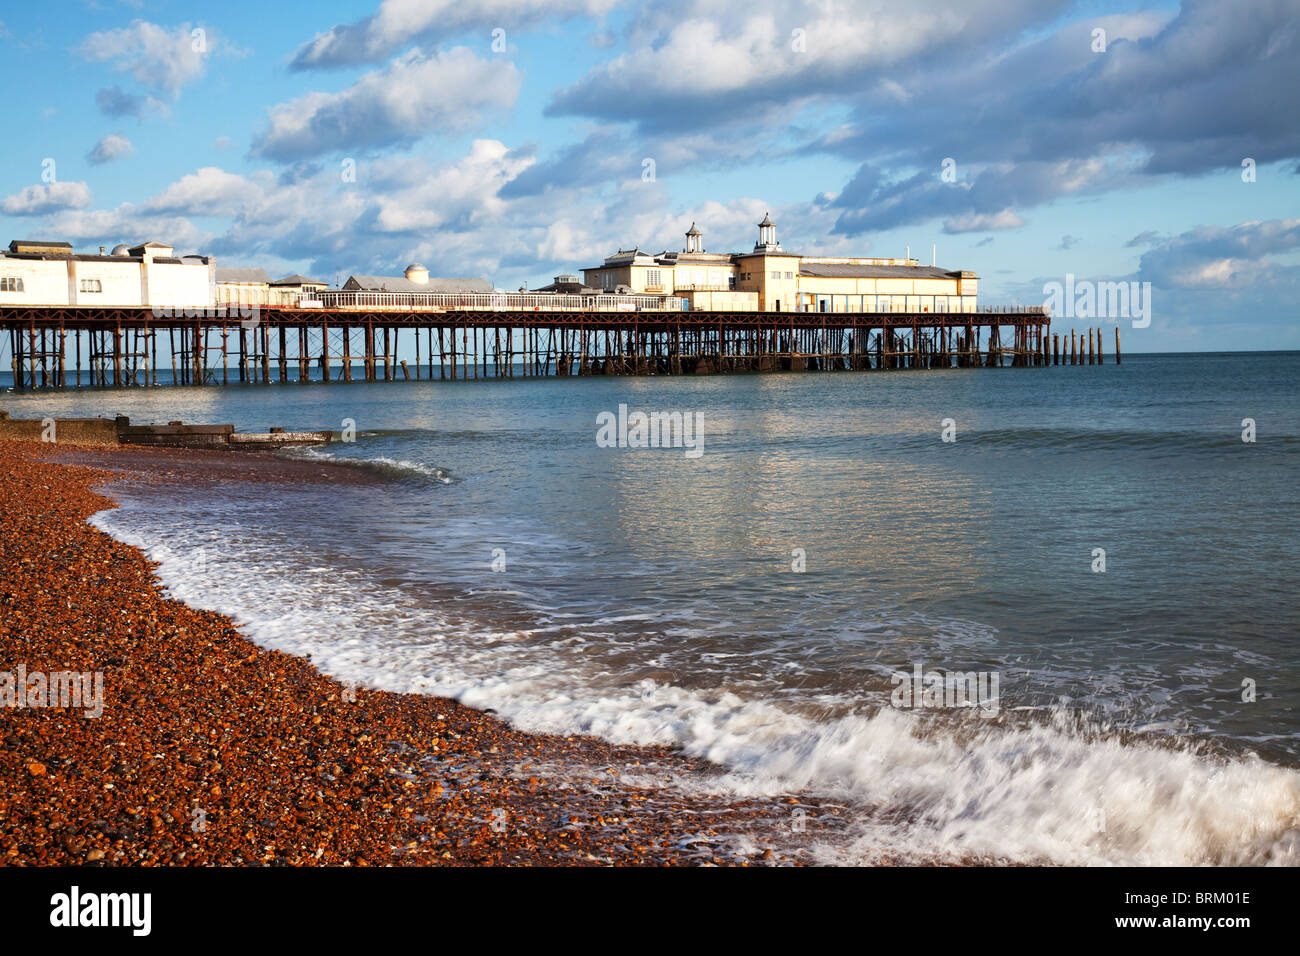 A landscape view of the derelict Hastings Pier Stock Photo